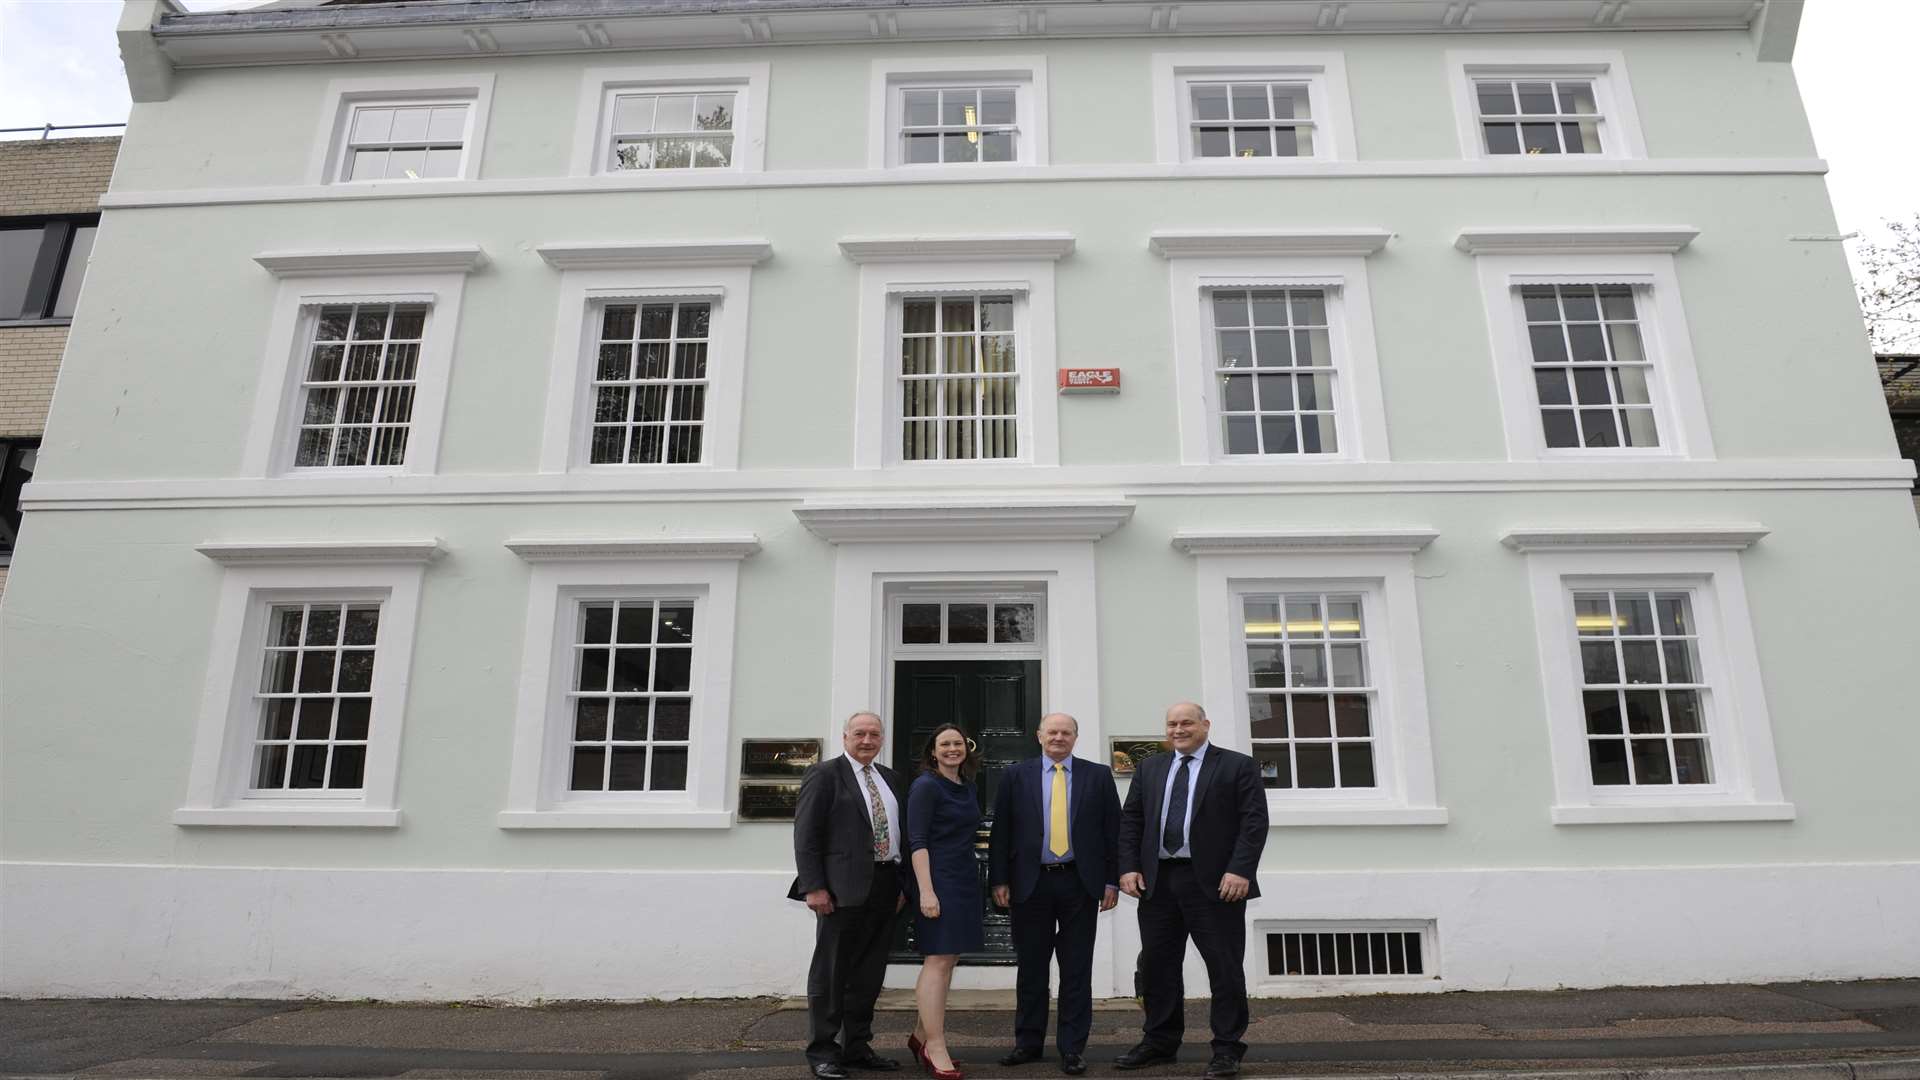 Tony Amlot, Claire Parry, Nigel Cripps and Rob Reynolds at the Lakin Clark office in Canterbury